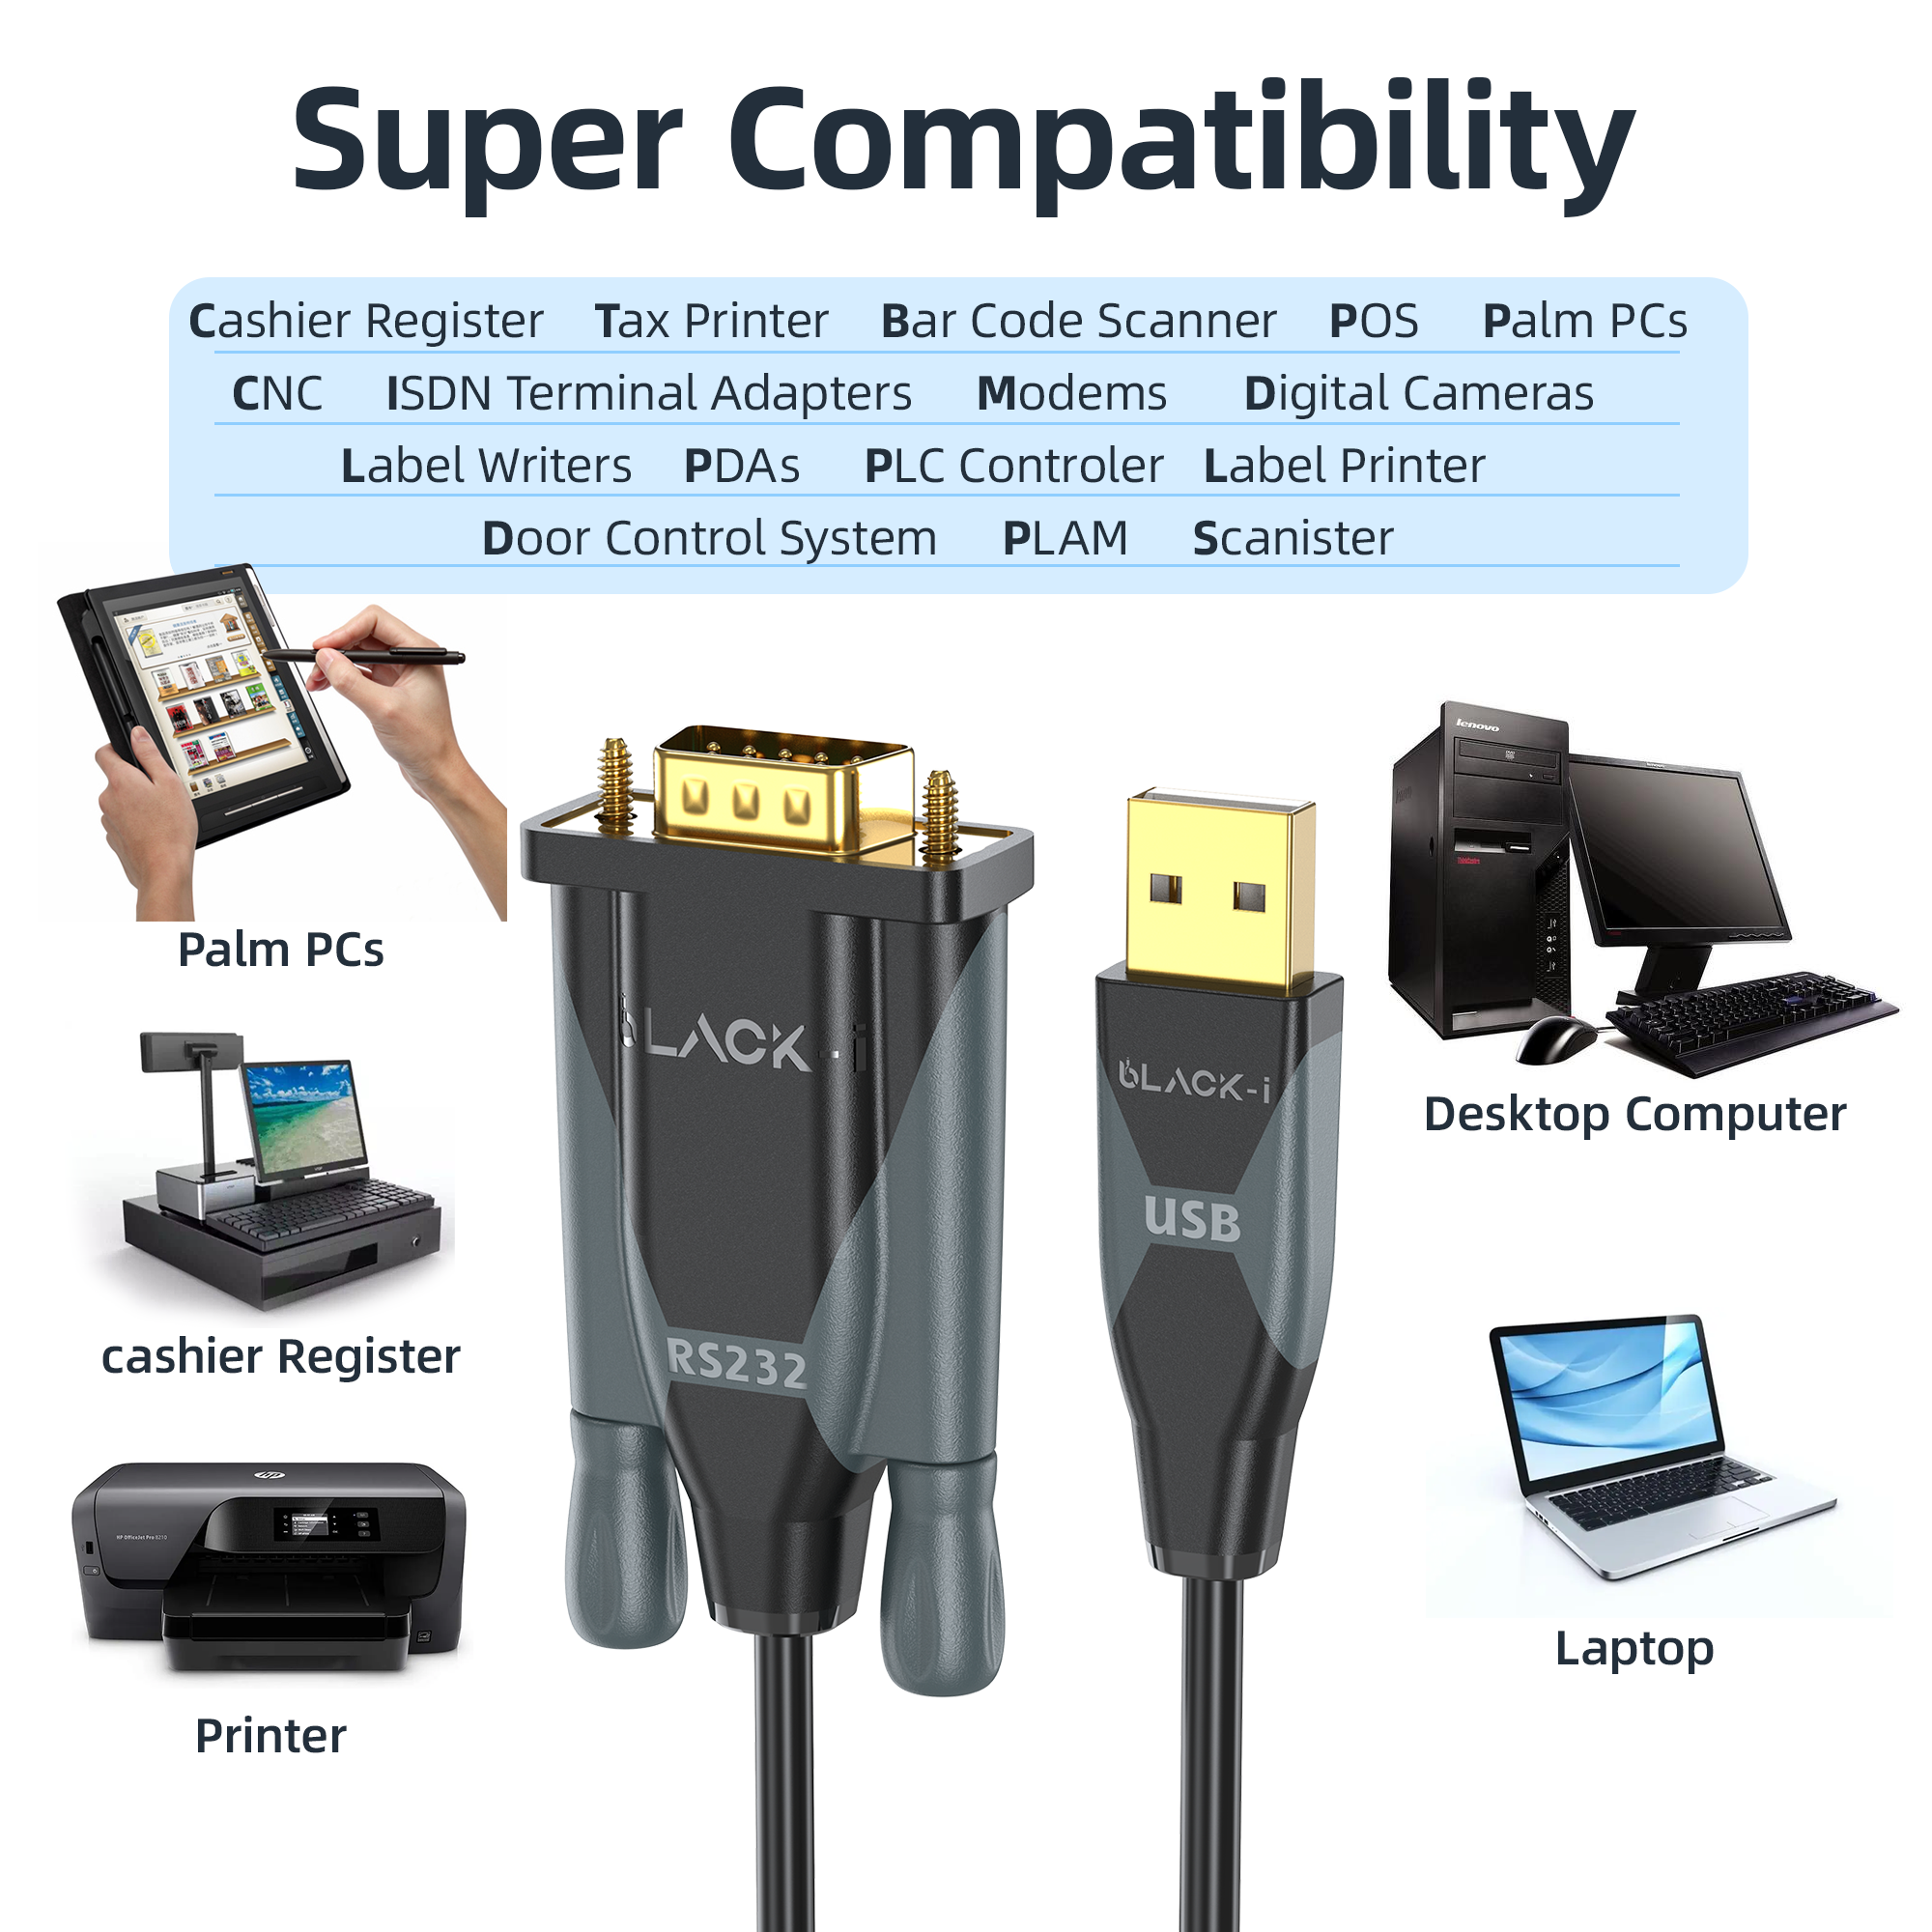 Black-i USB 2.0 to RS232 Cable - 1.5 Meter Length – Reliable Serial Communication for Seamless Connectivity